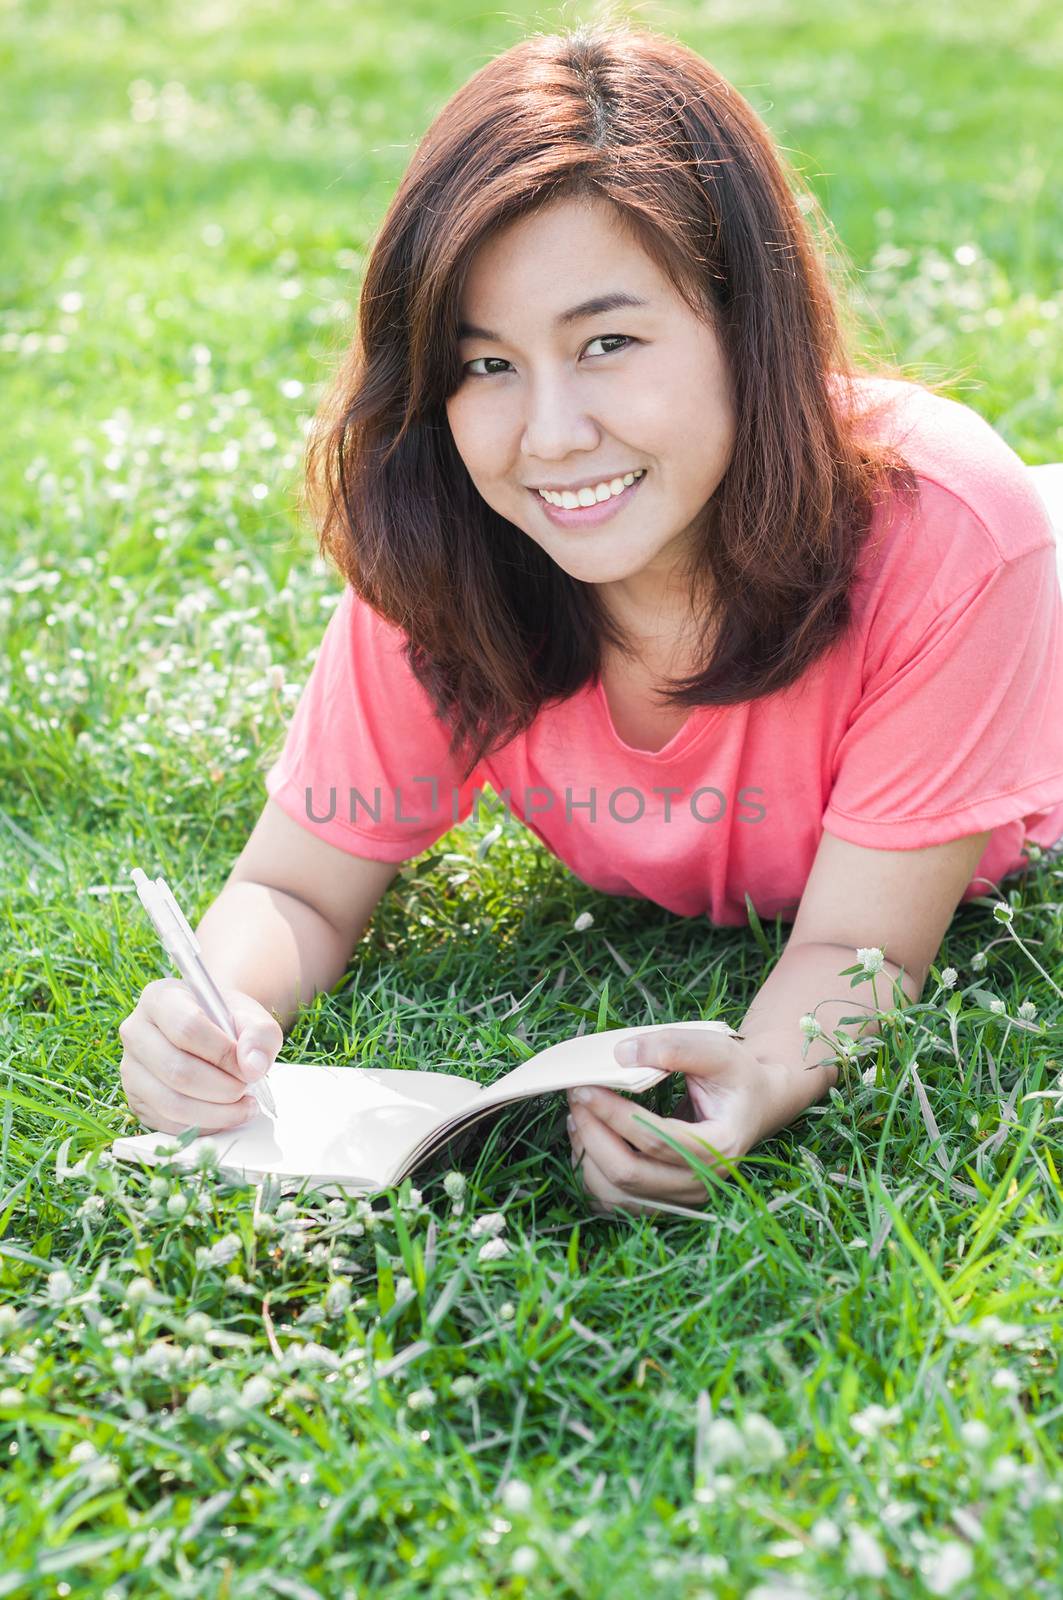 Happy Young Asian Woman Writing in Notebook and Smiling in Spring Garden.